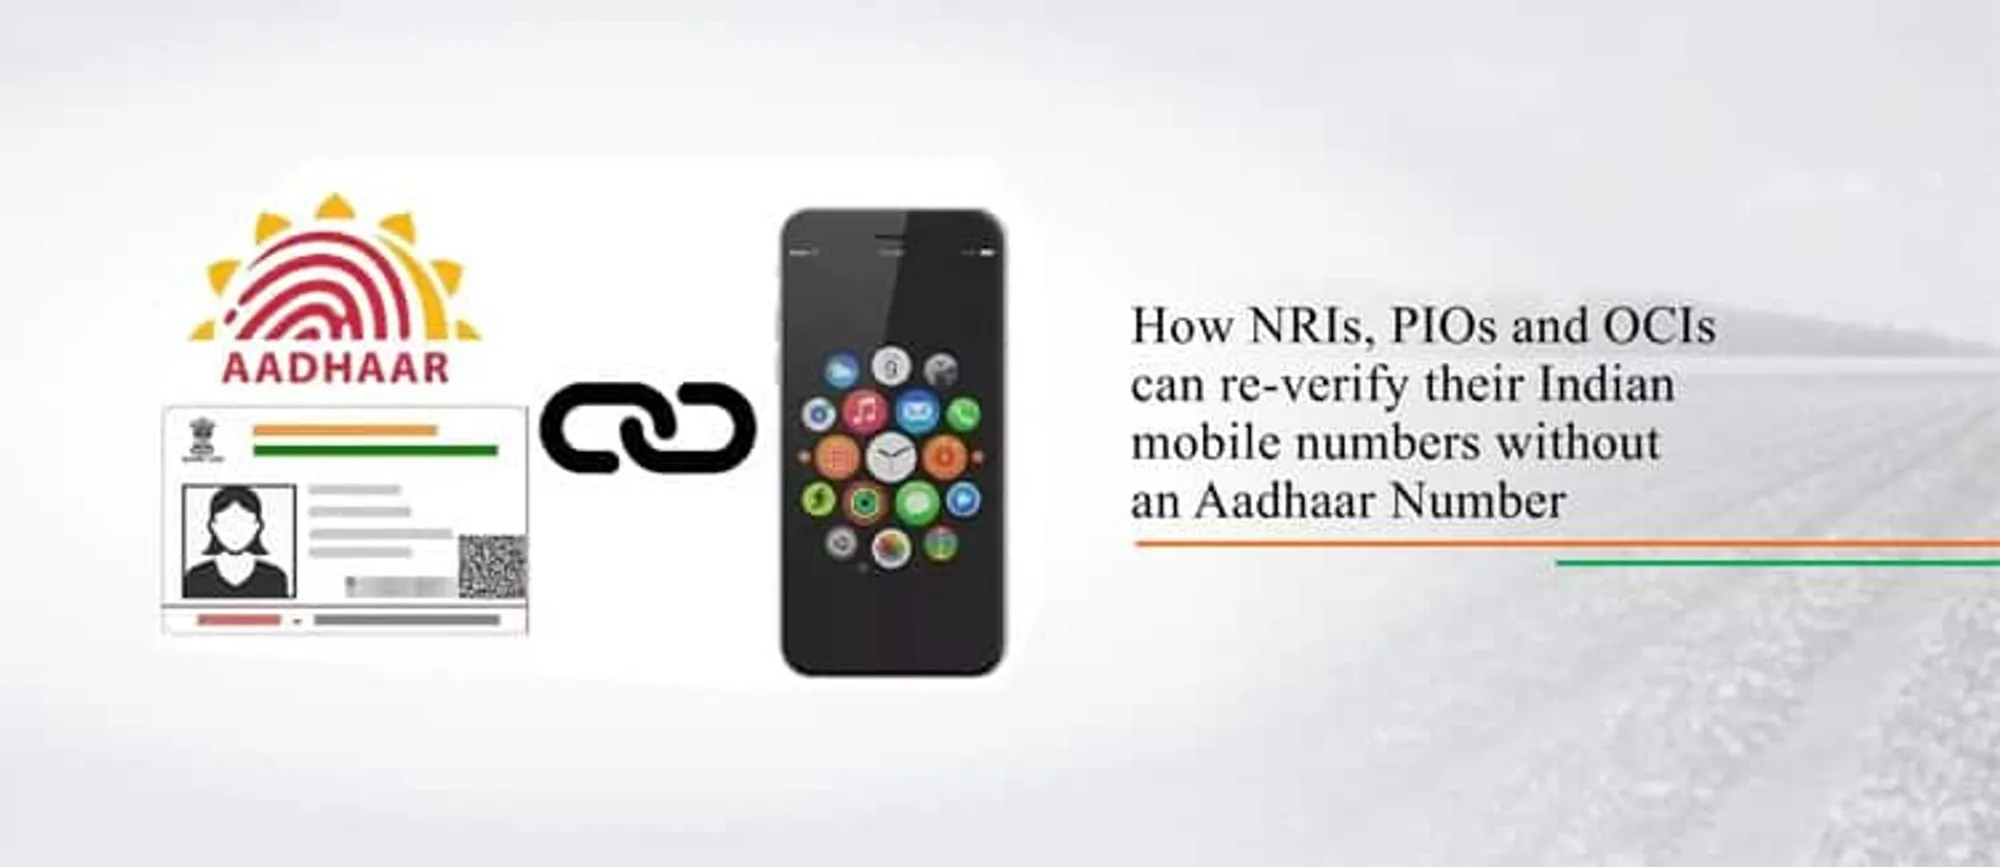 How NRIs, PIOs and OCIs can re-verify their Indian mobile numbers without an Aadhaar Number